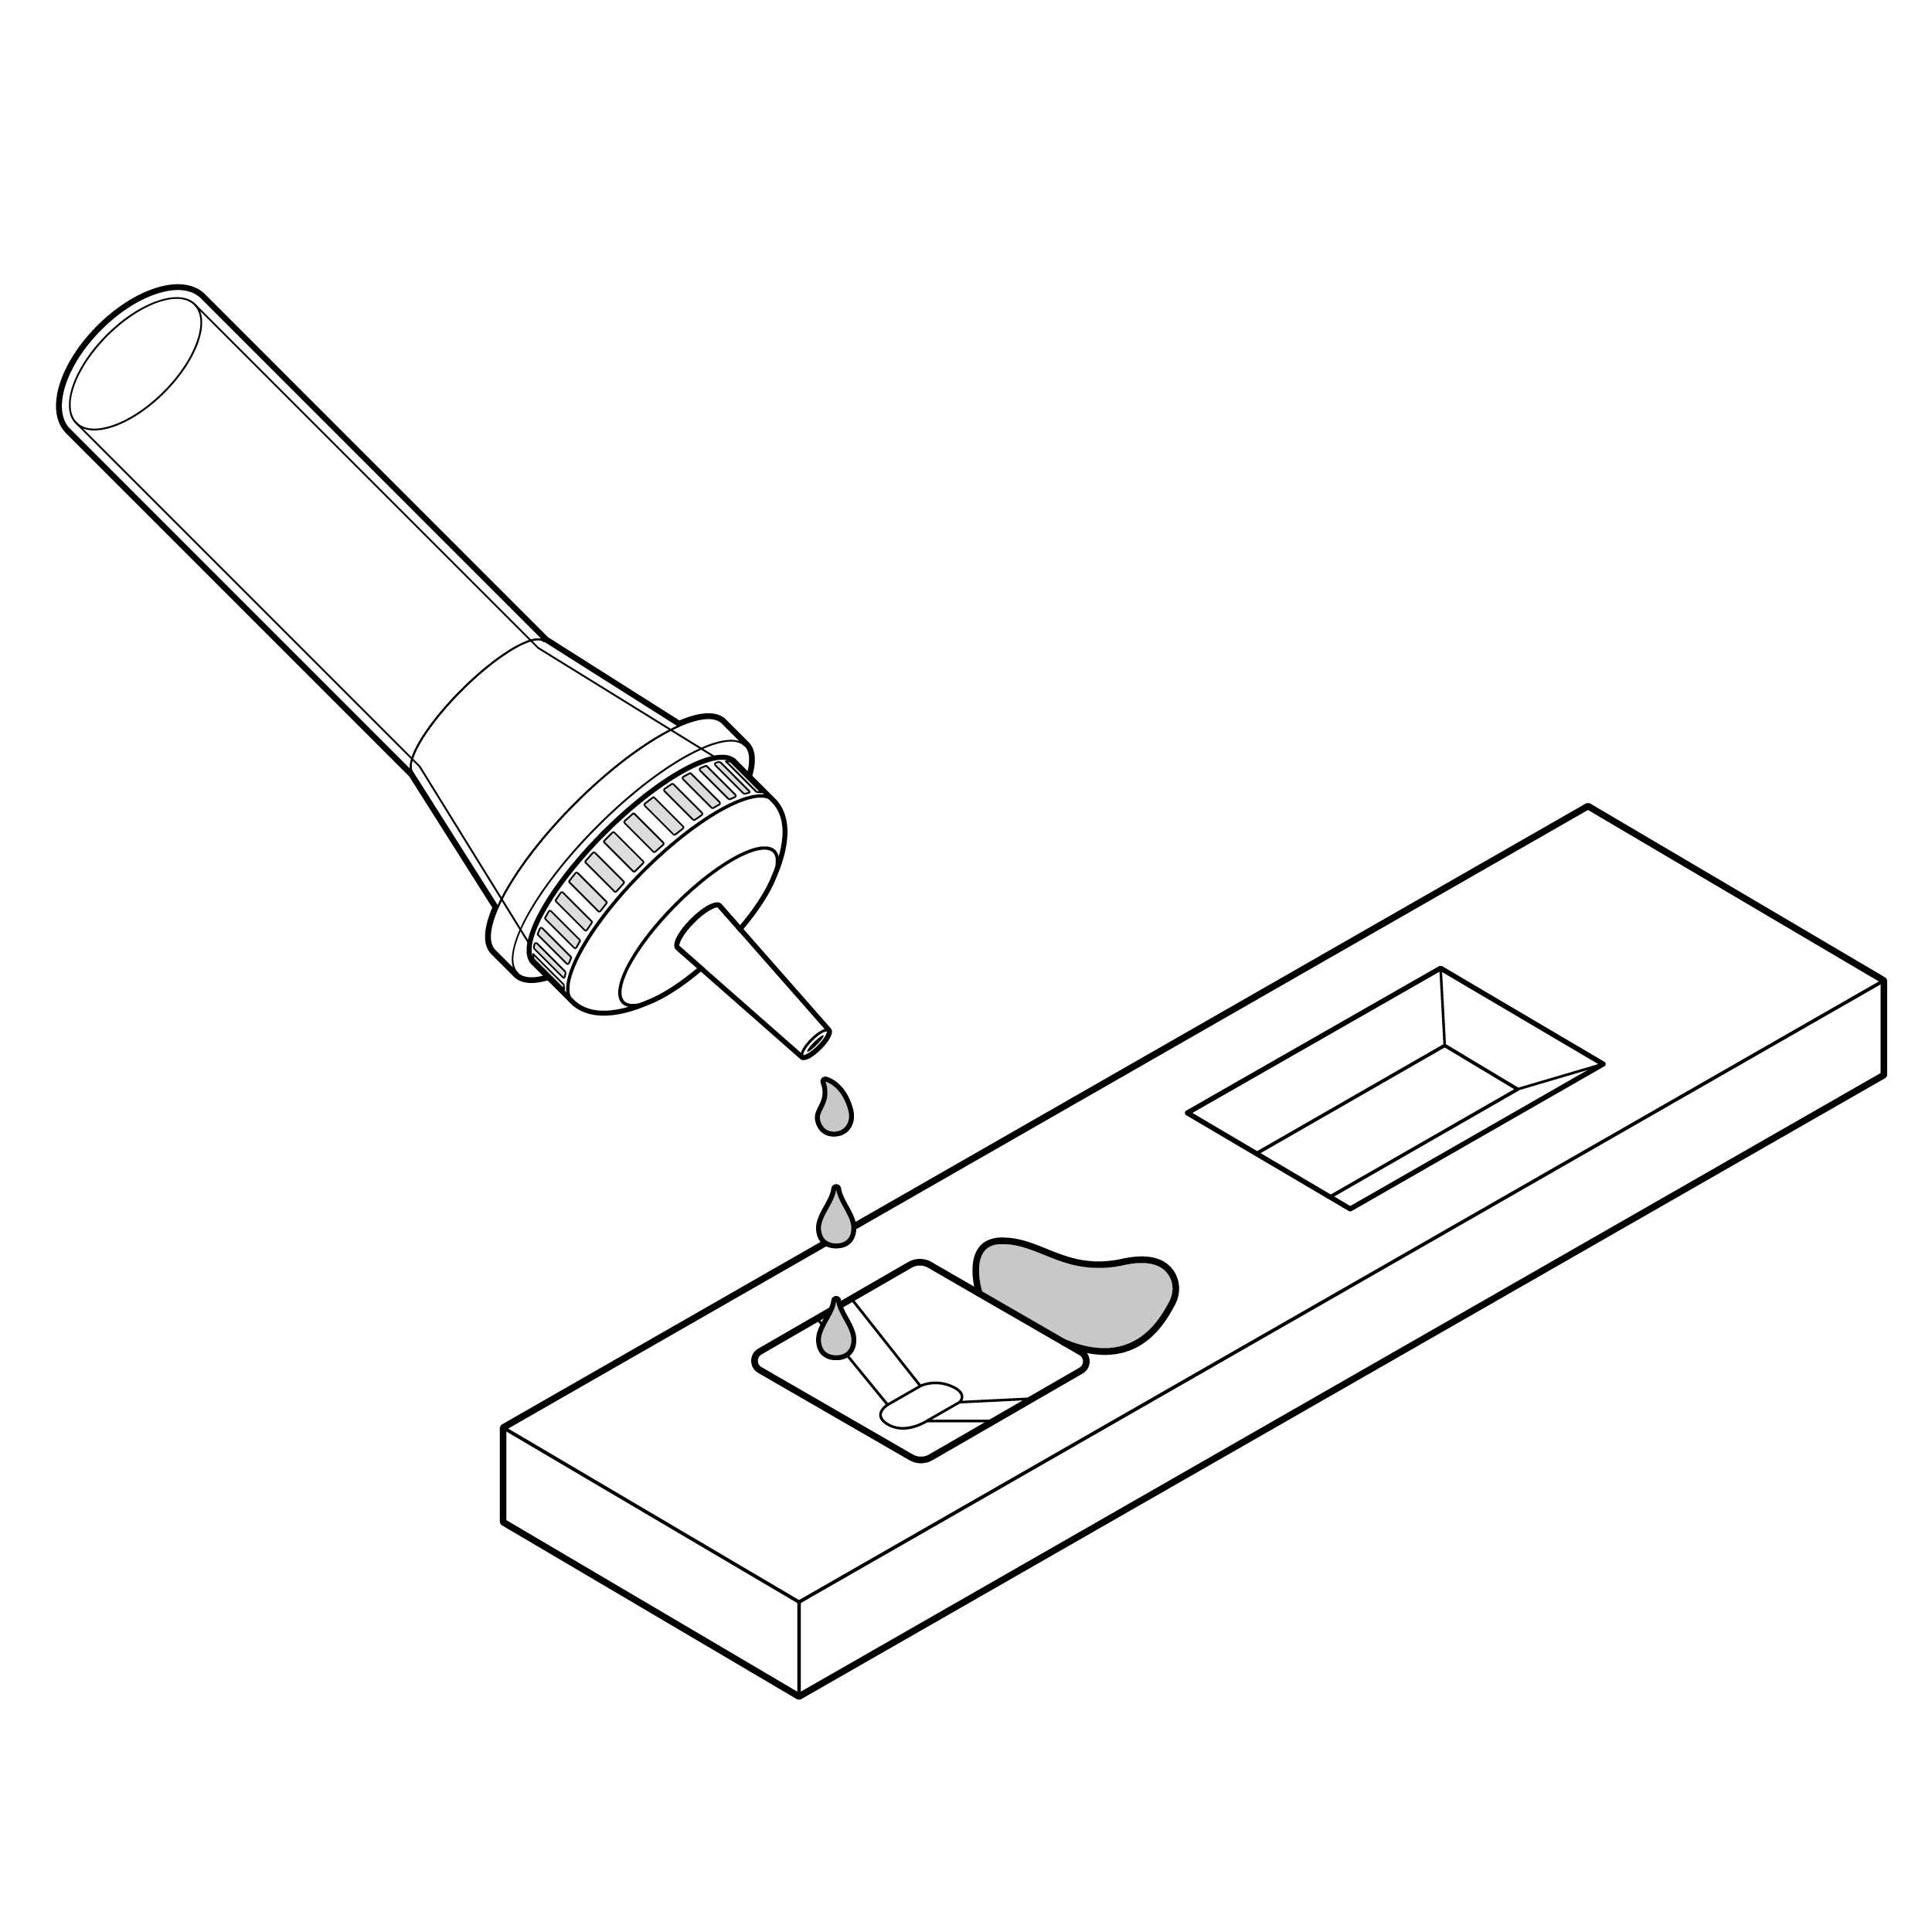 Vial dispensing drops into the sample well of a cassette. The well feature is recessed into the body of the cassette, and the fluid drops have spilled outside of the well feature.